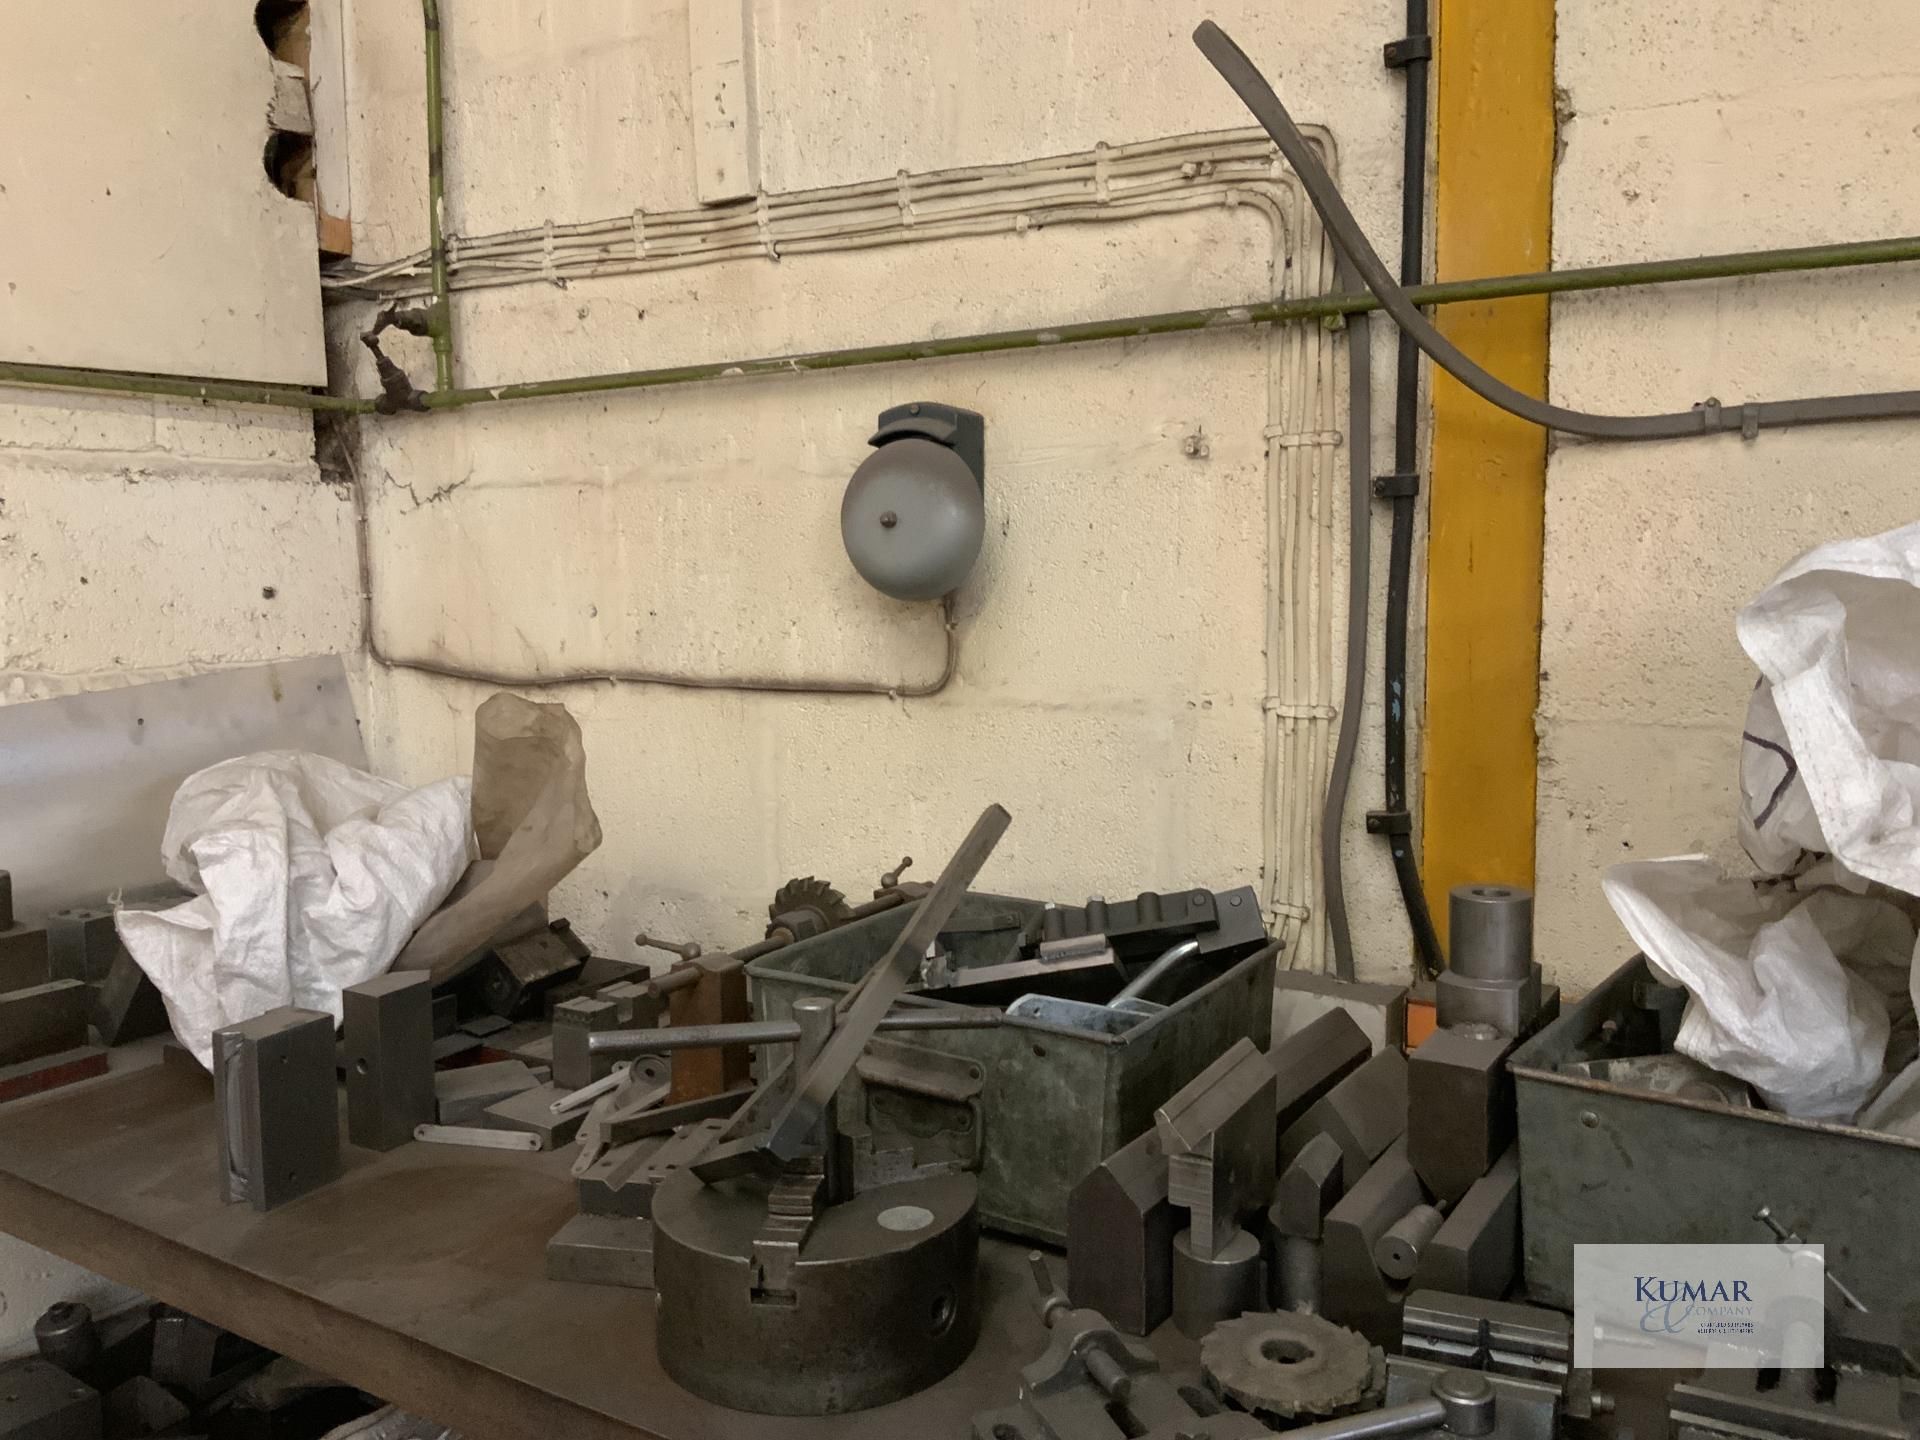 Machine tooling as imaged -  Collection Day – Tuesday 27th February Unit 4 Goscote Industrial